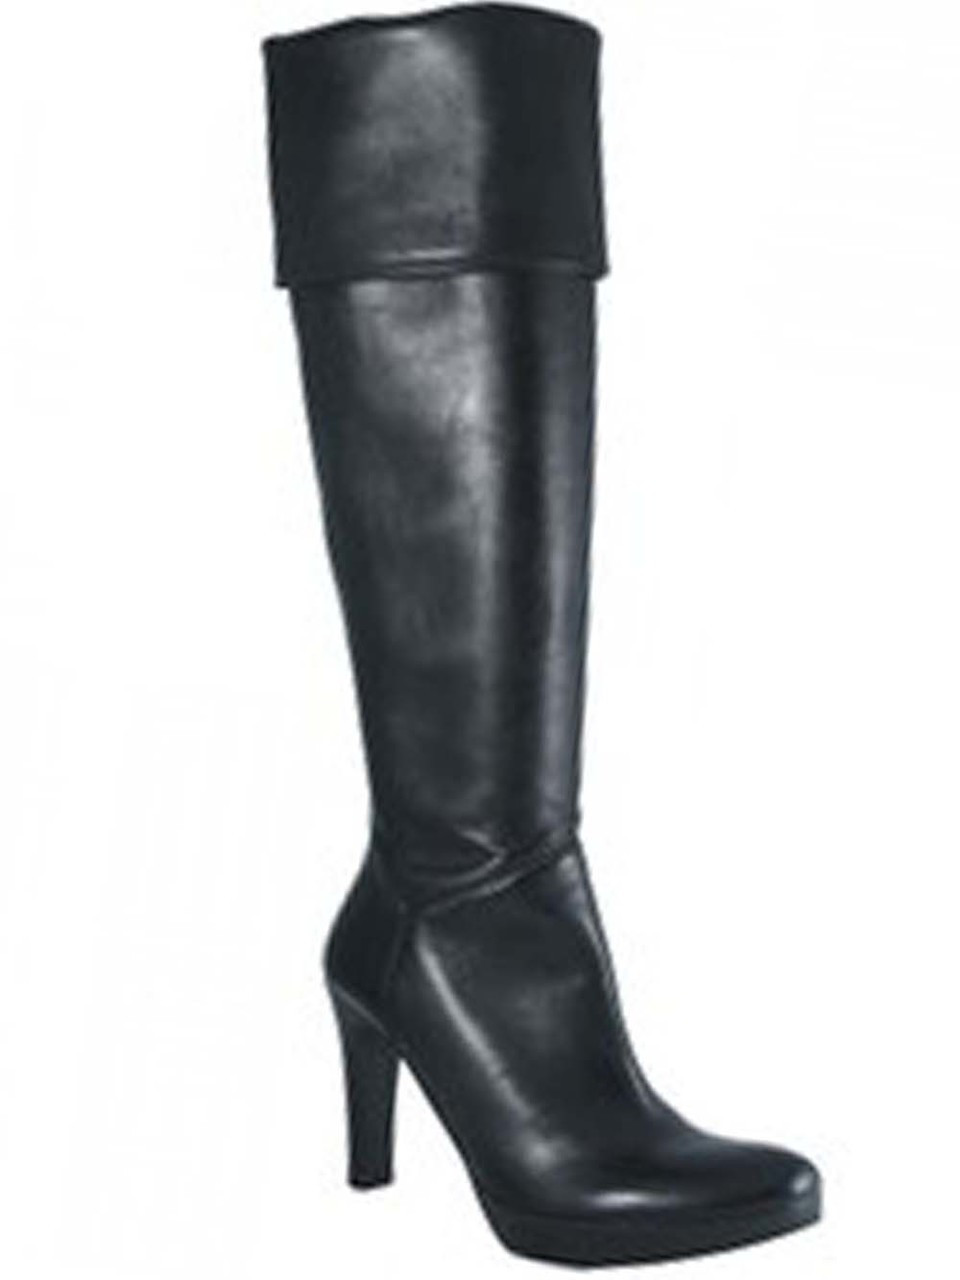 knee high black leather boots with heel